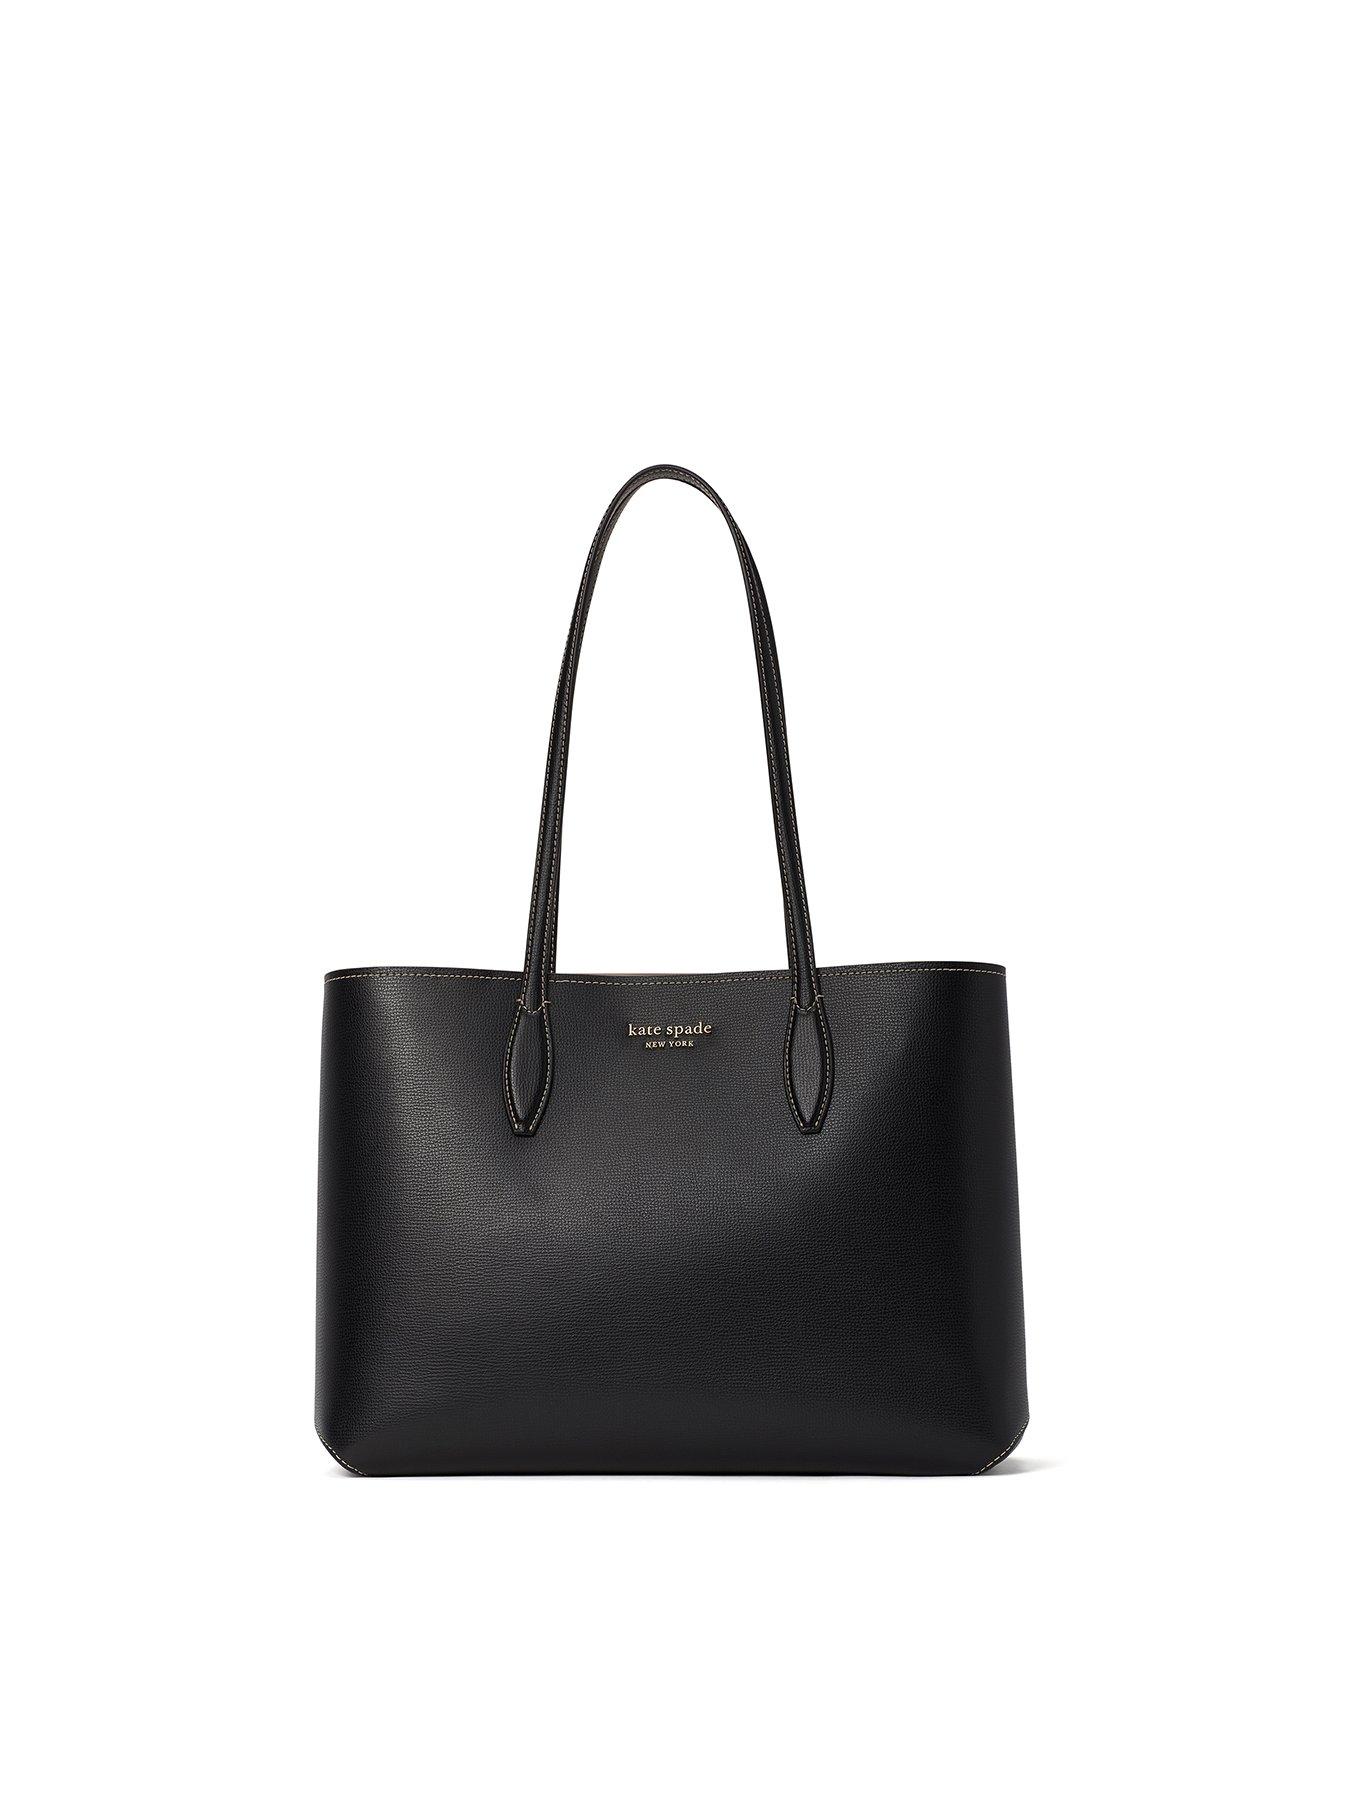 Kate Spade New York All Day Tote - Black | very.co.uk